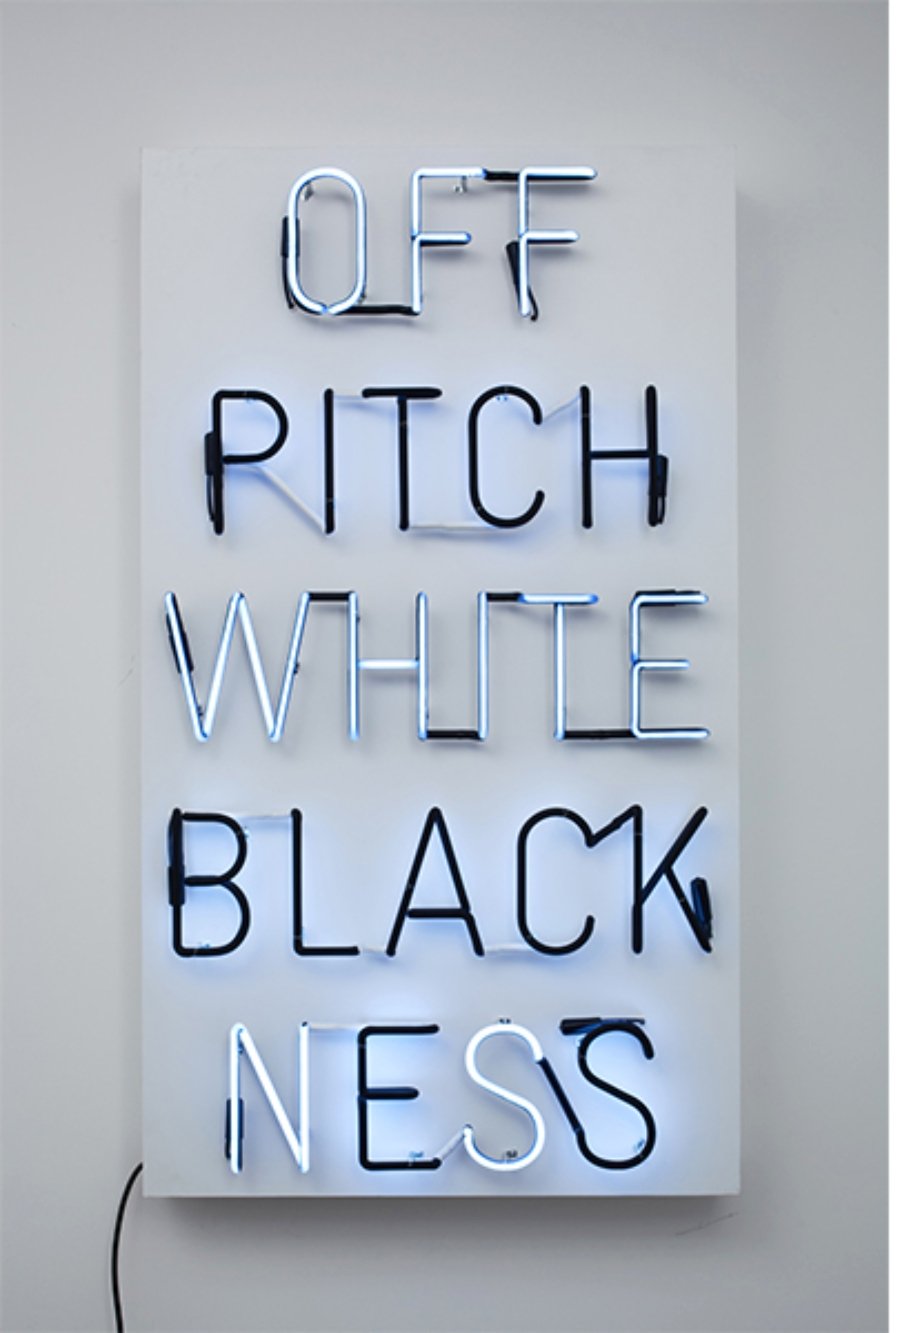 Pitch Blackness/Off Whiteness, 2009. Neon sign, 58 × 33 inches. Collection of Art Bridges. Image courtesy of the artist and Jack Shainman Gallery, New York.